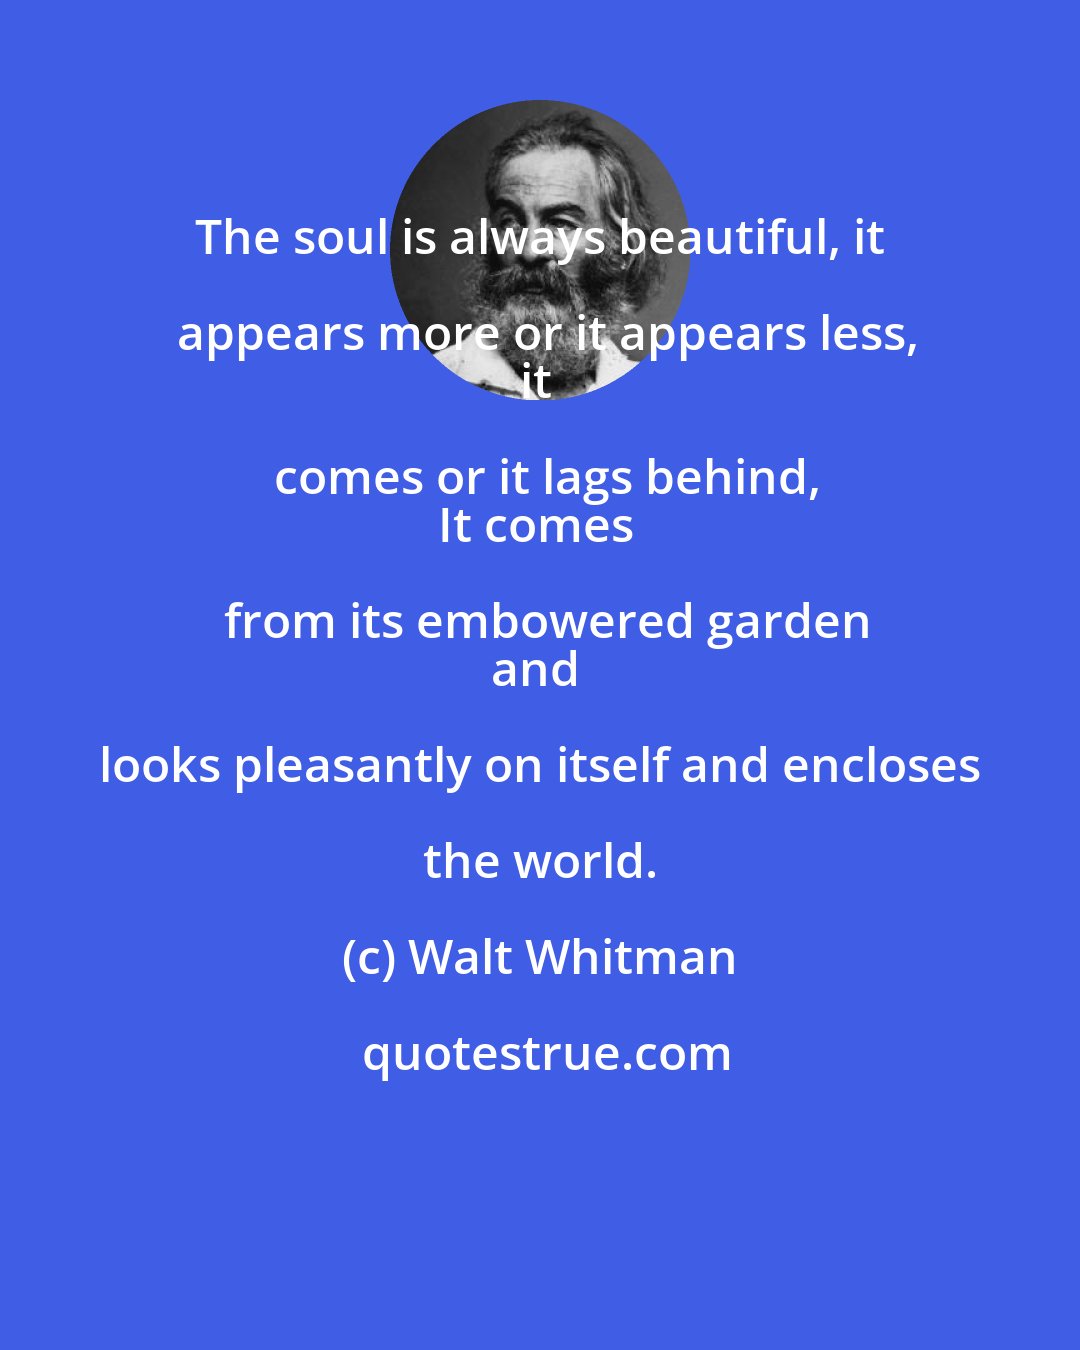 Walt Whitman: The soul is always beautiful, it appears more or it appears less,
it comes or it lags behind,
It comes from its embowered garden
and looks pleasantly on itself and encloses the world.